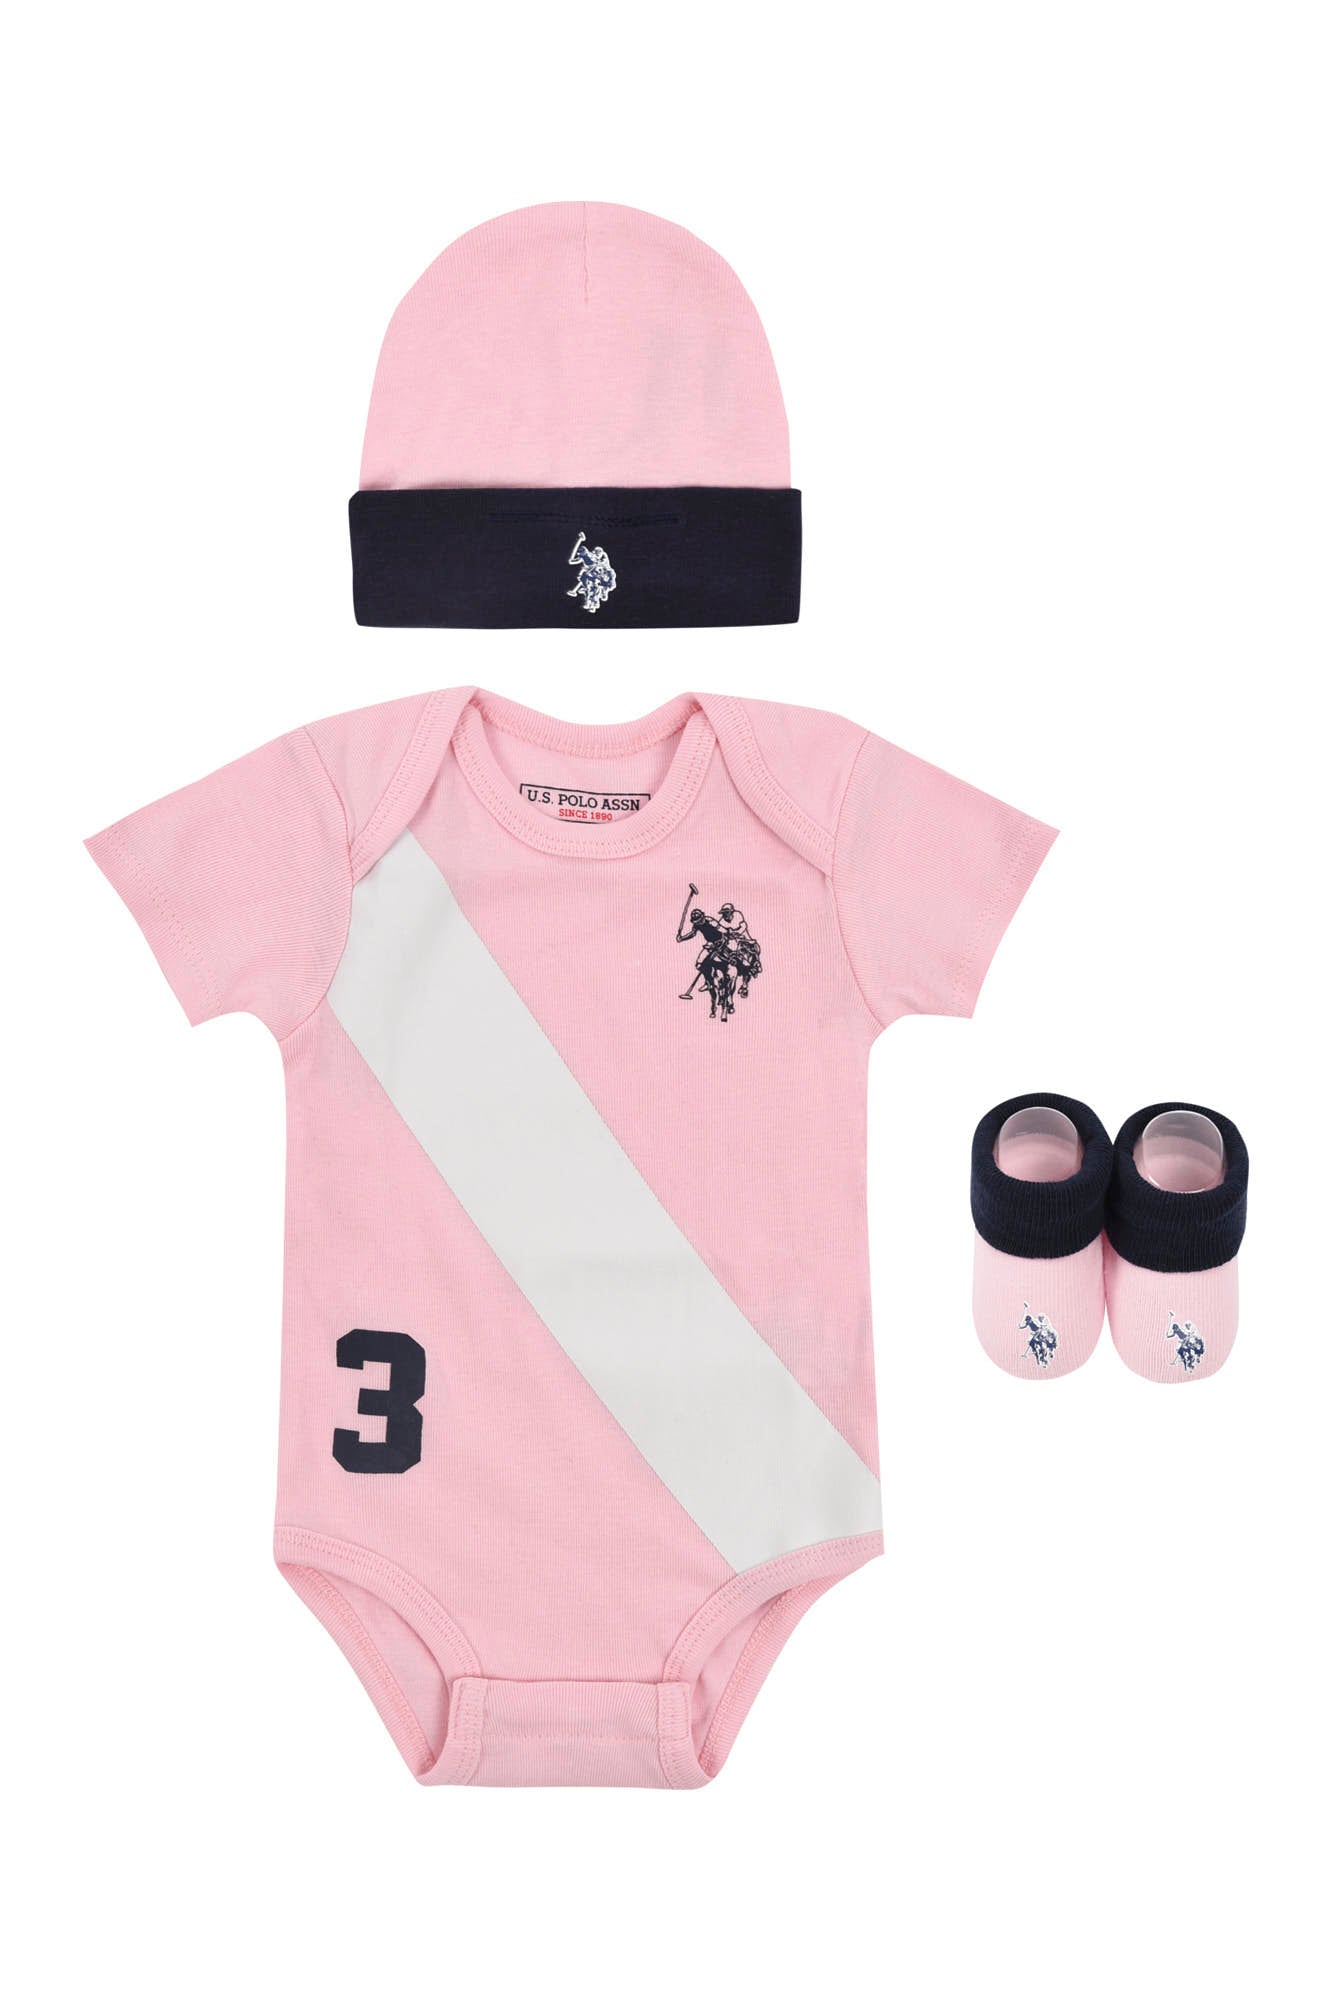 U.S. Polo Assn. Baby 3 Piece Gifting Set in Light Pink